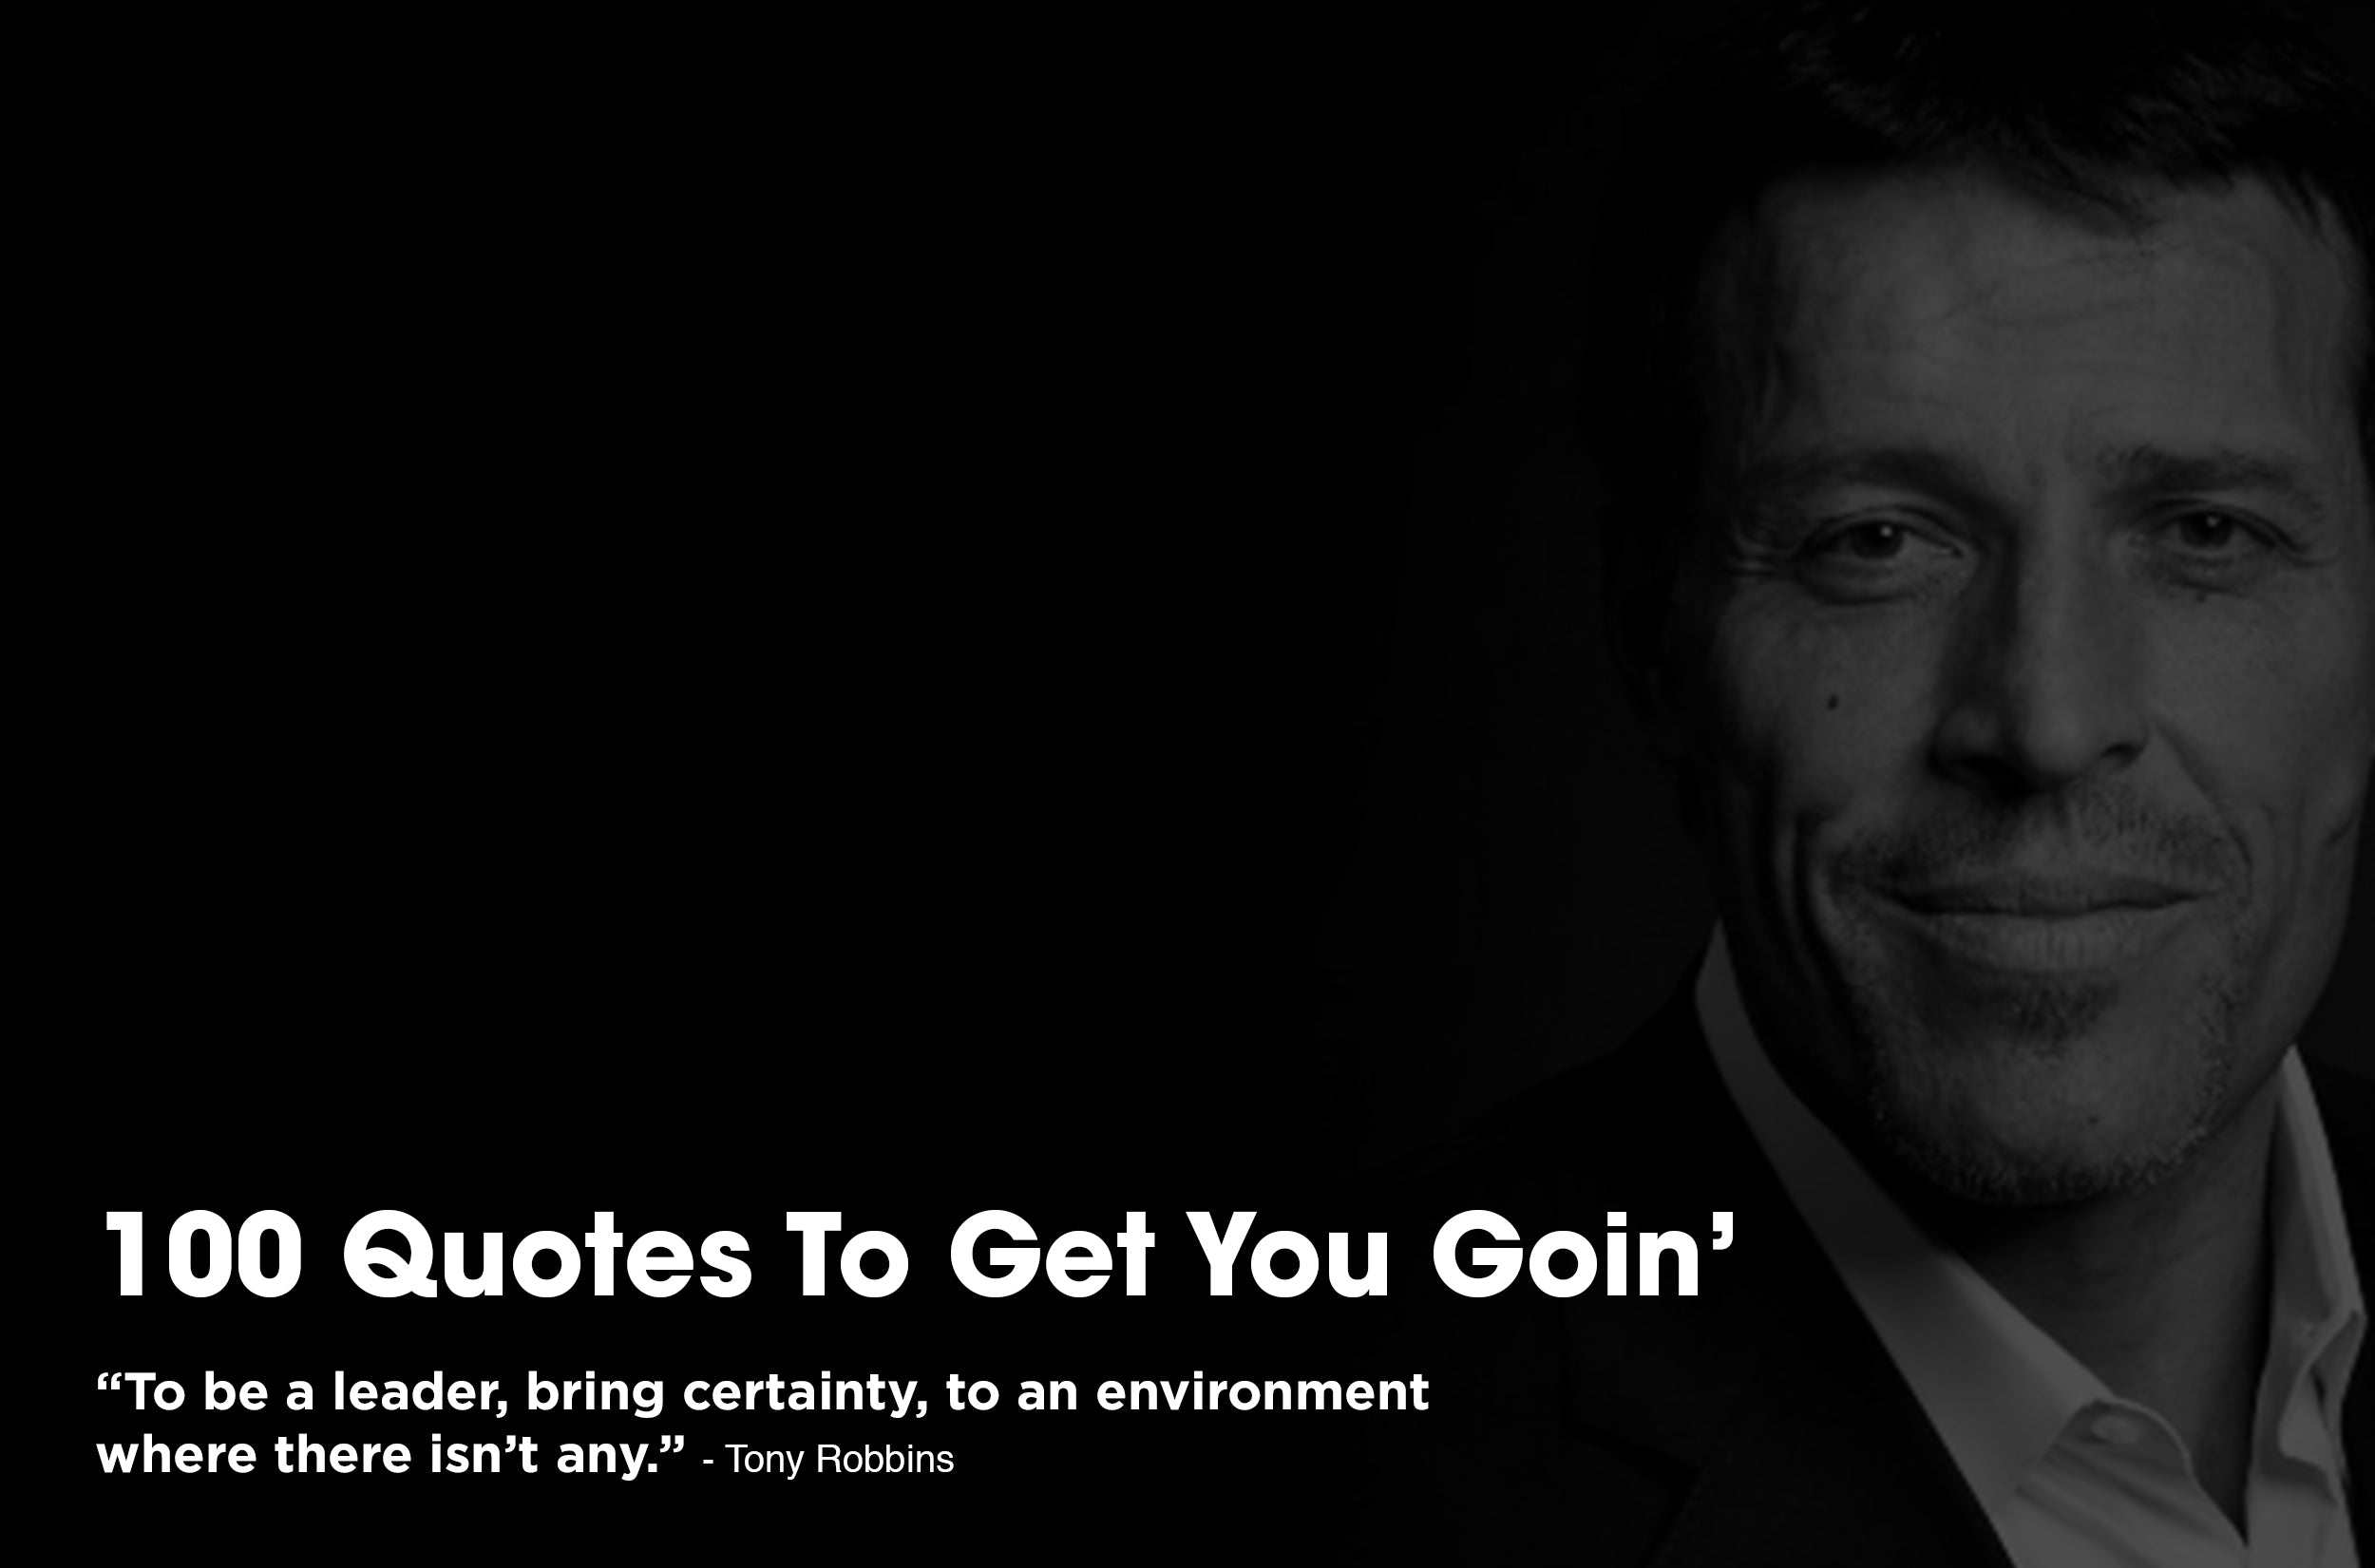 100 Short Quotes To Get You Goin'